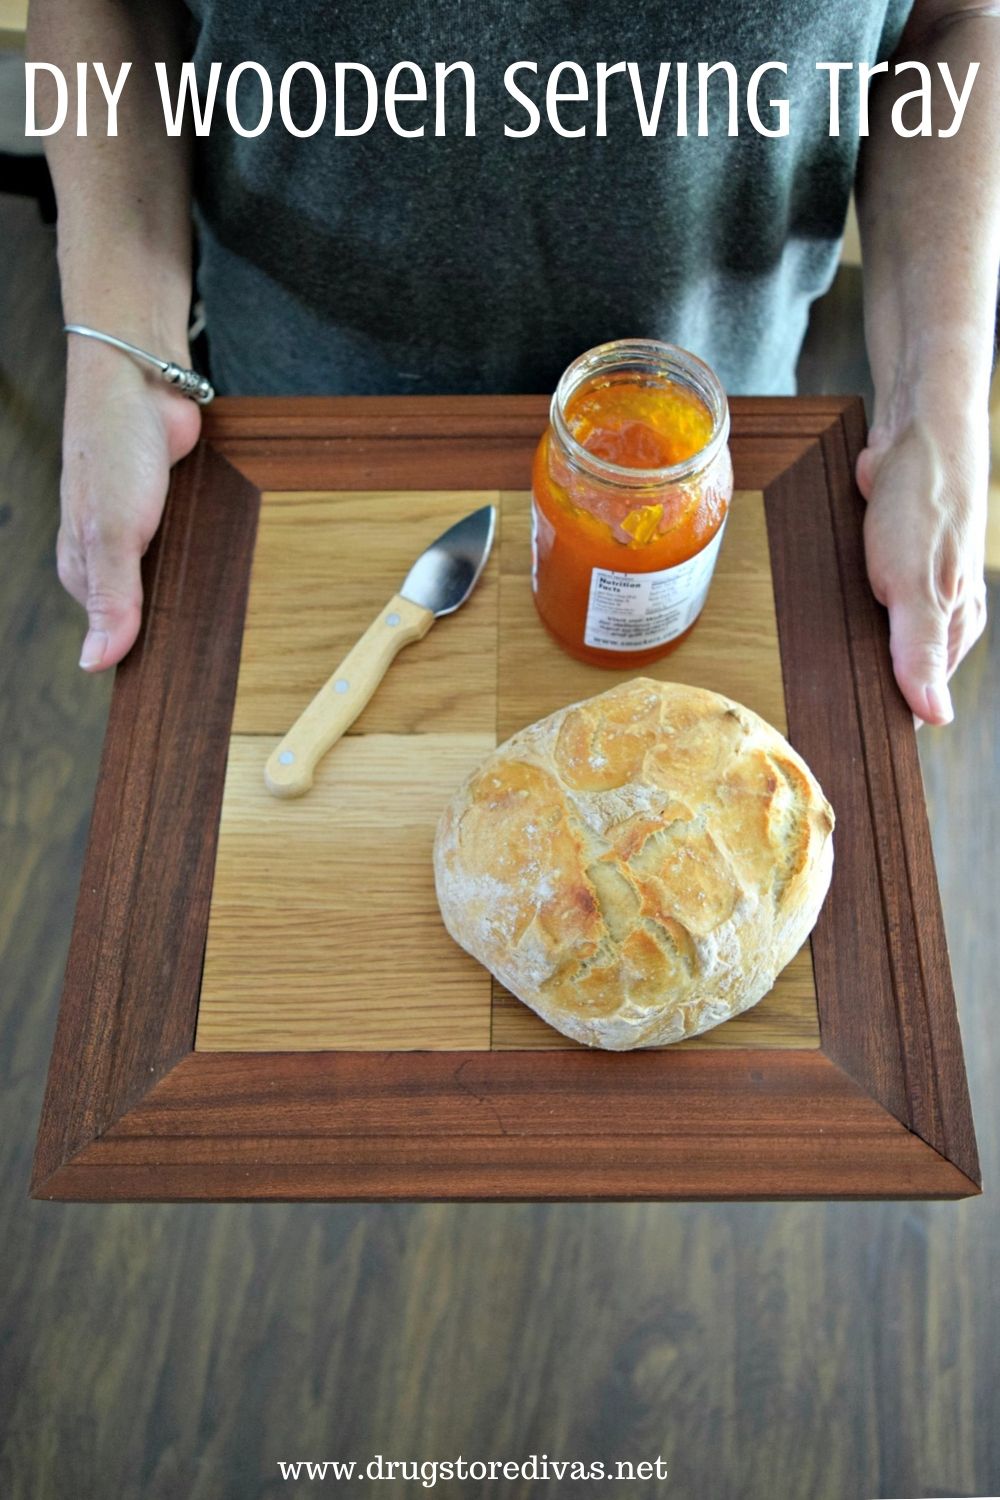 A woman holding a serving tray with bread and jelly on it and the words "DIY Wooden Serving Tray" digitally written on top.